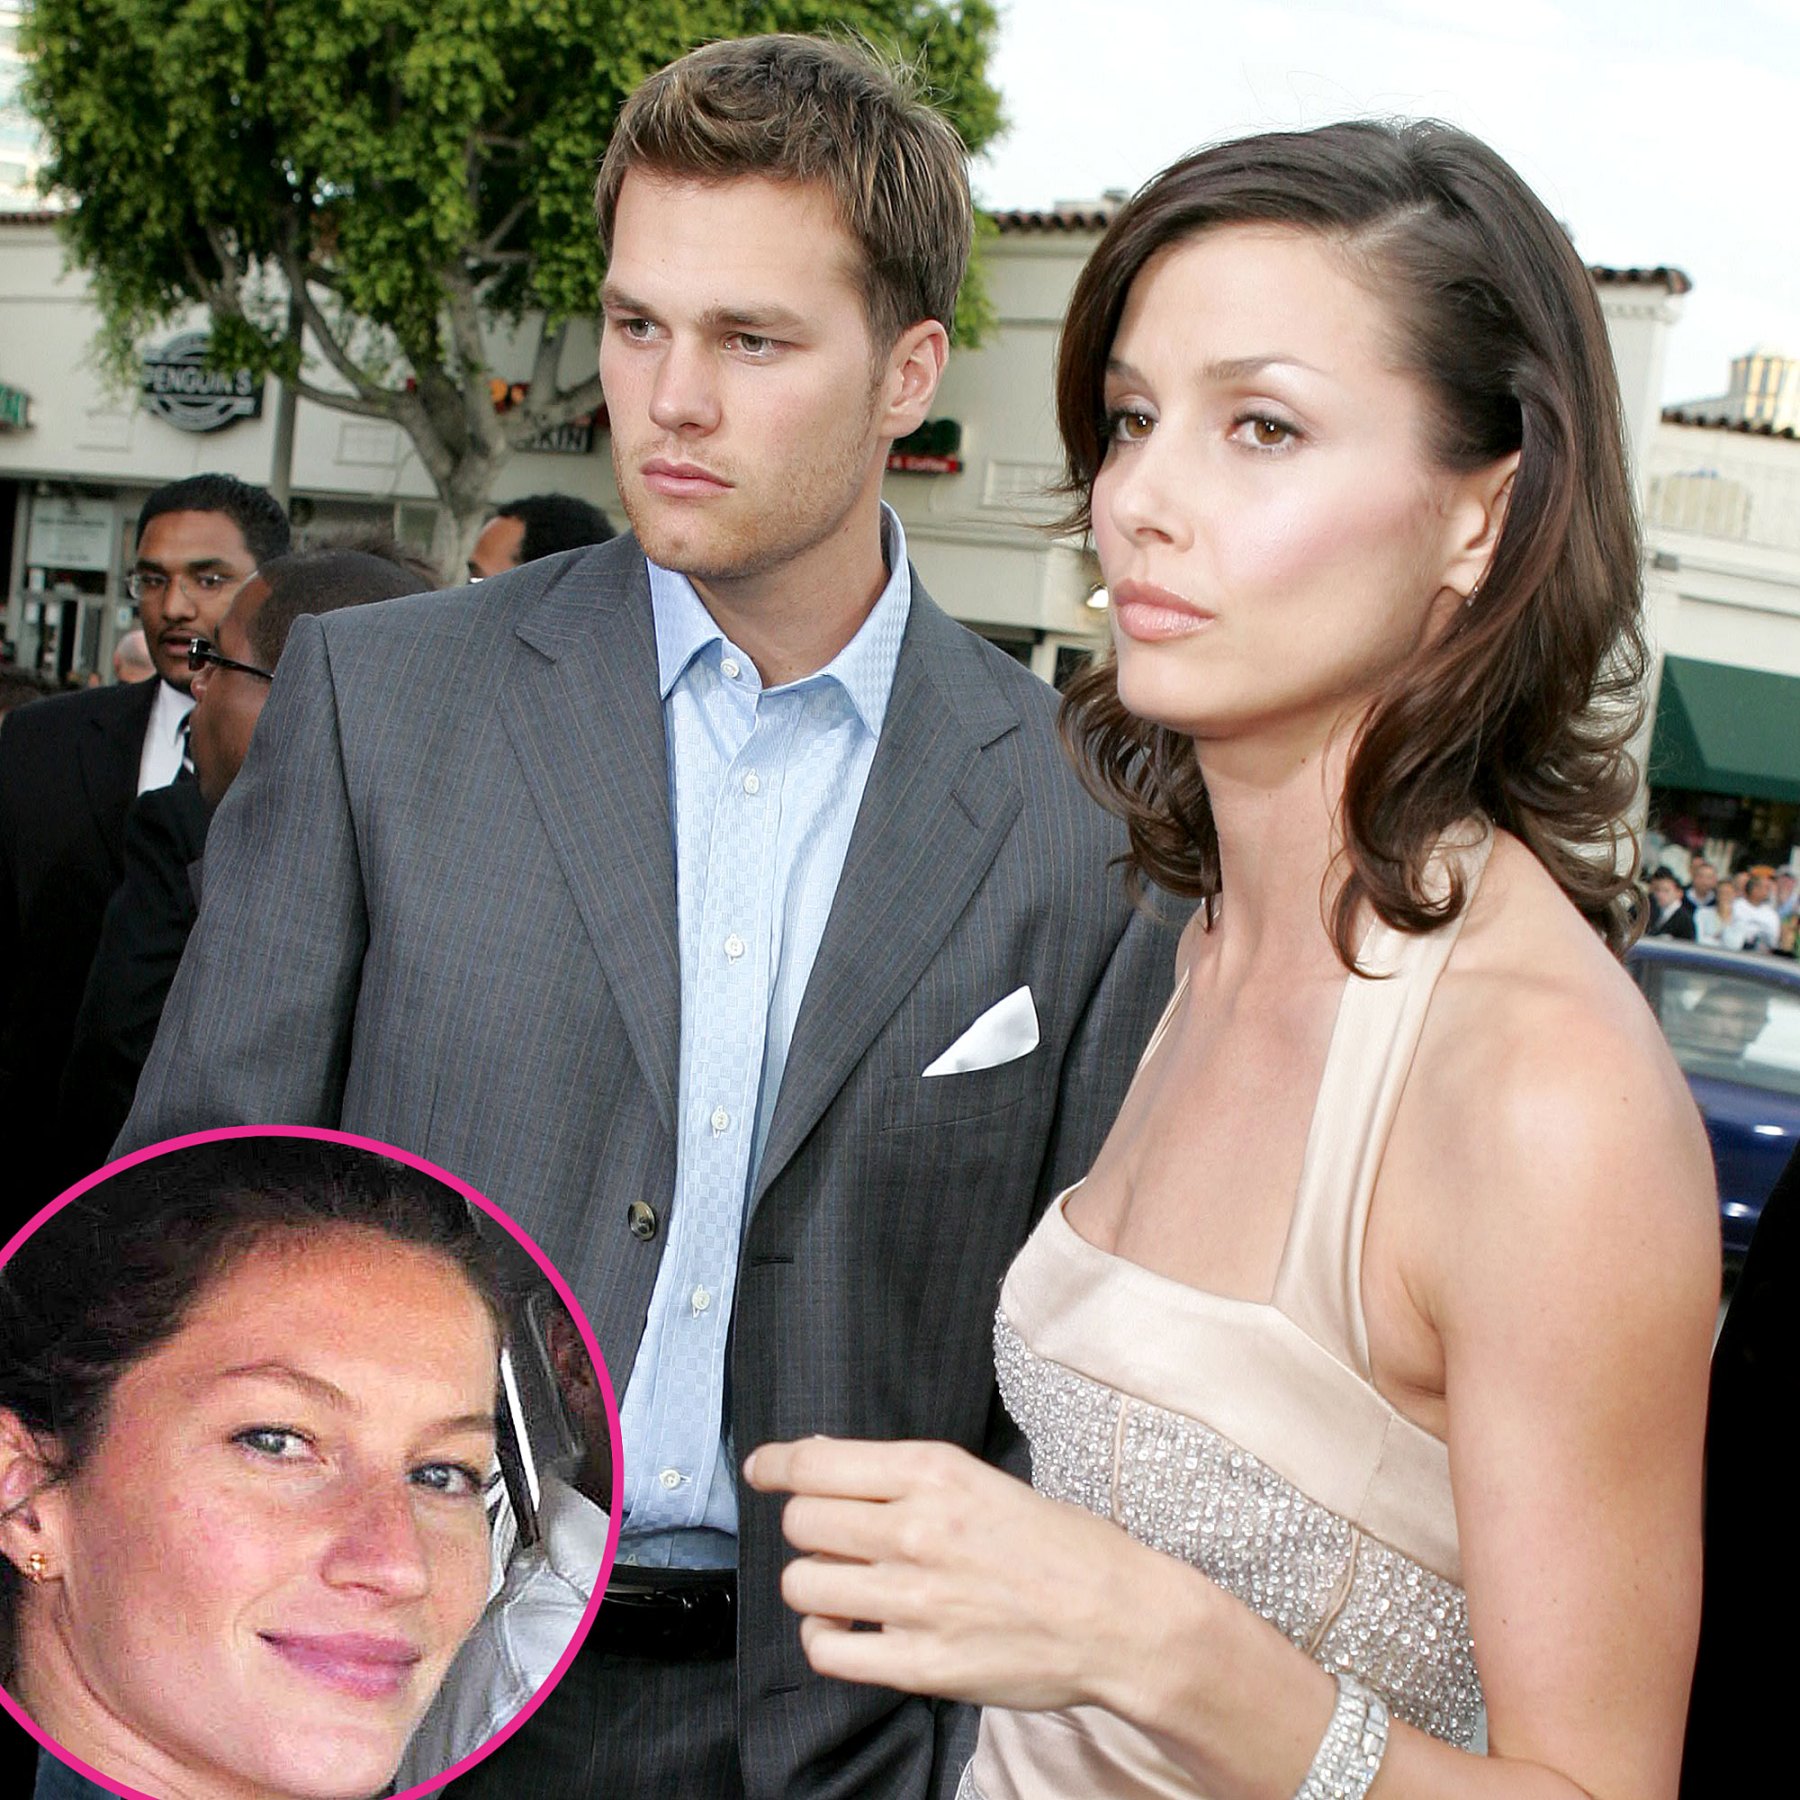 Bridget Moynahans Quotes About Her Relationship With Ex Tom Brady Us Weekly 1824